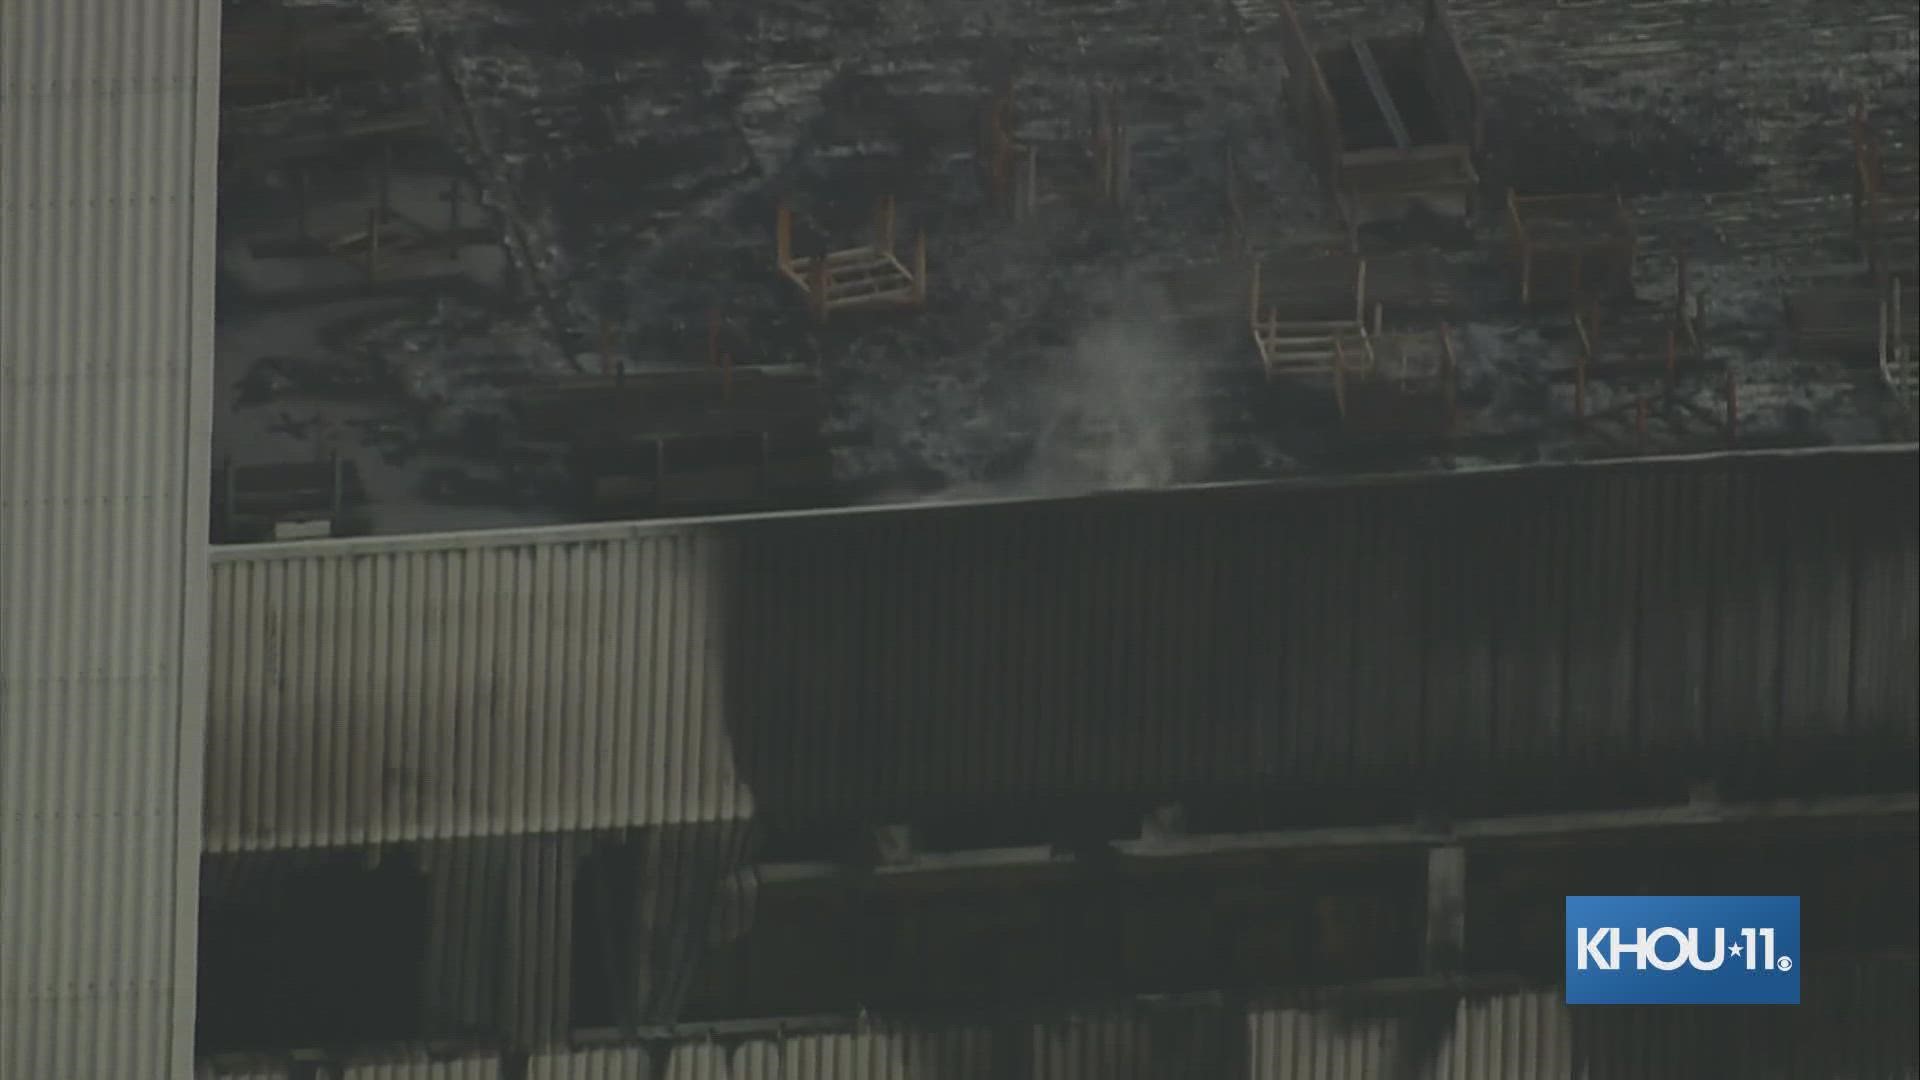 A spokesman for NRG Energy said around 5 a.m. that the fire is out and that crews are just monitoring for hot spots.